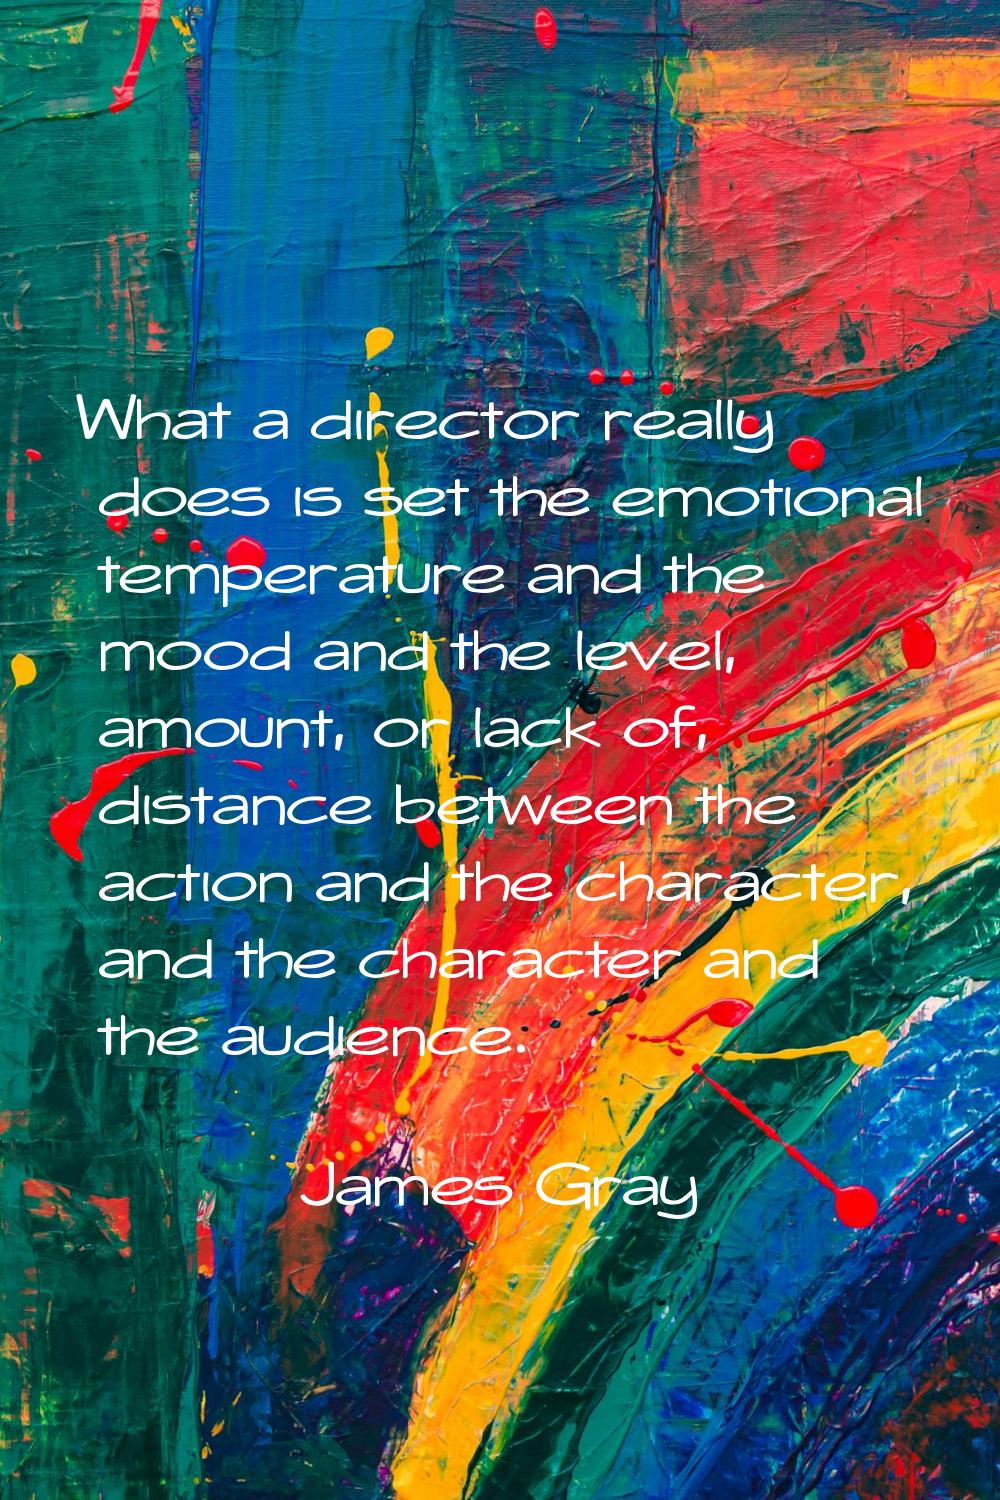 What a director really does is set the emotional temperature and the mood and the level, amount, or